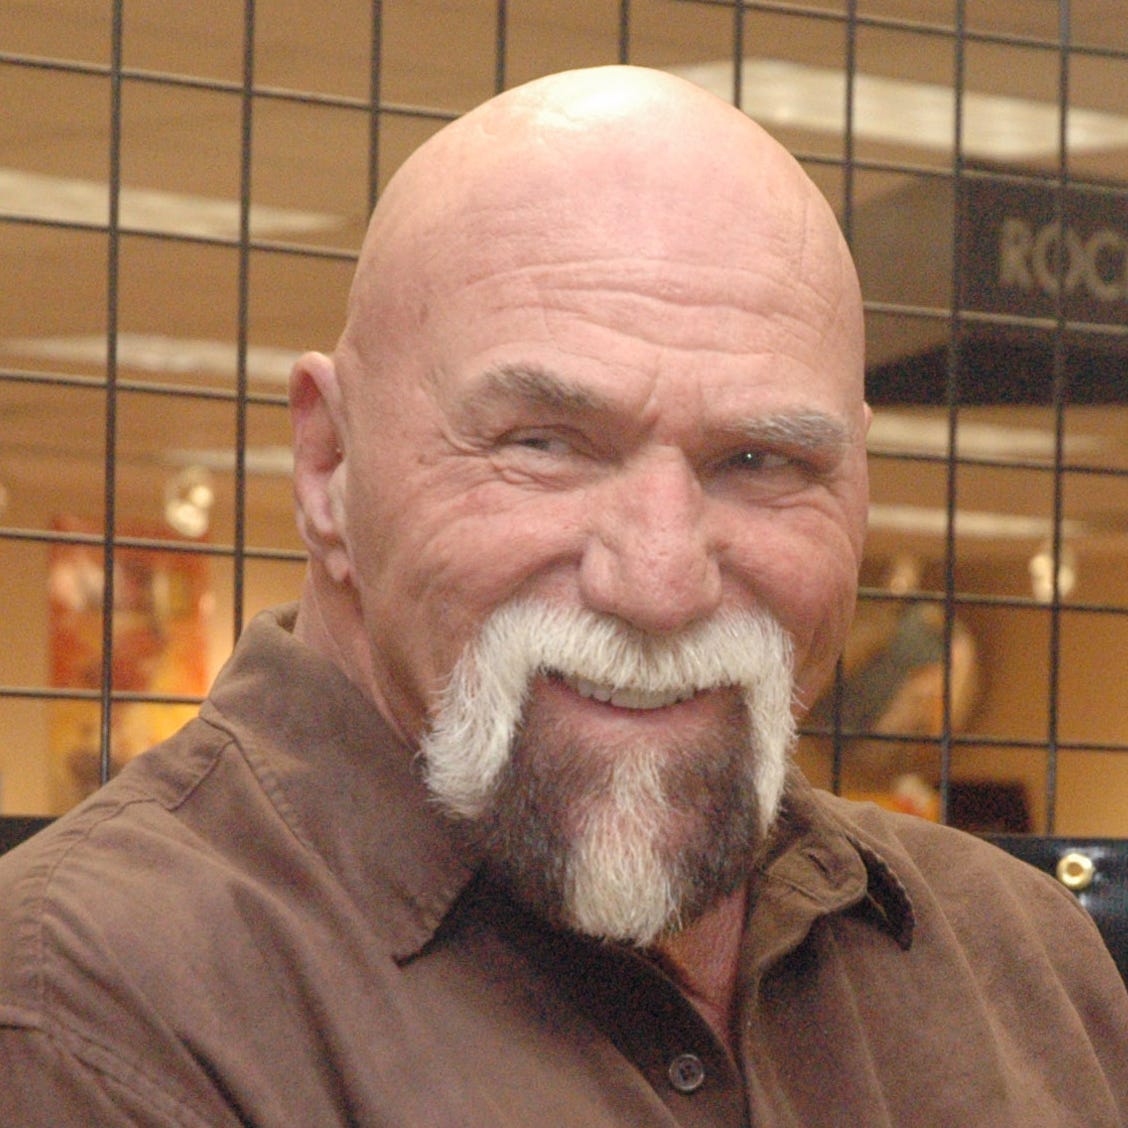 Superstar Billy Graham Signs His Book "Tangled Ropes," on Feb. 21, 2006 at Borders Books in Princeton, N.J.